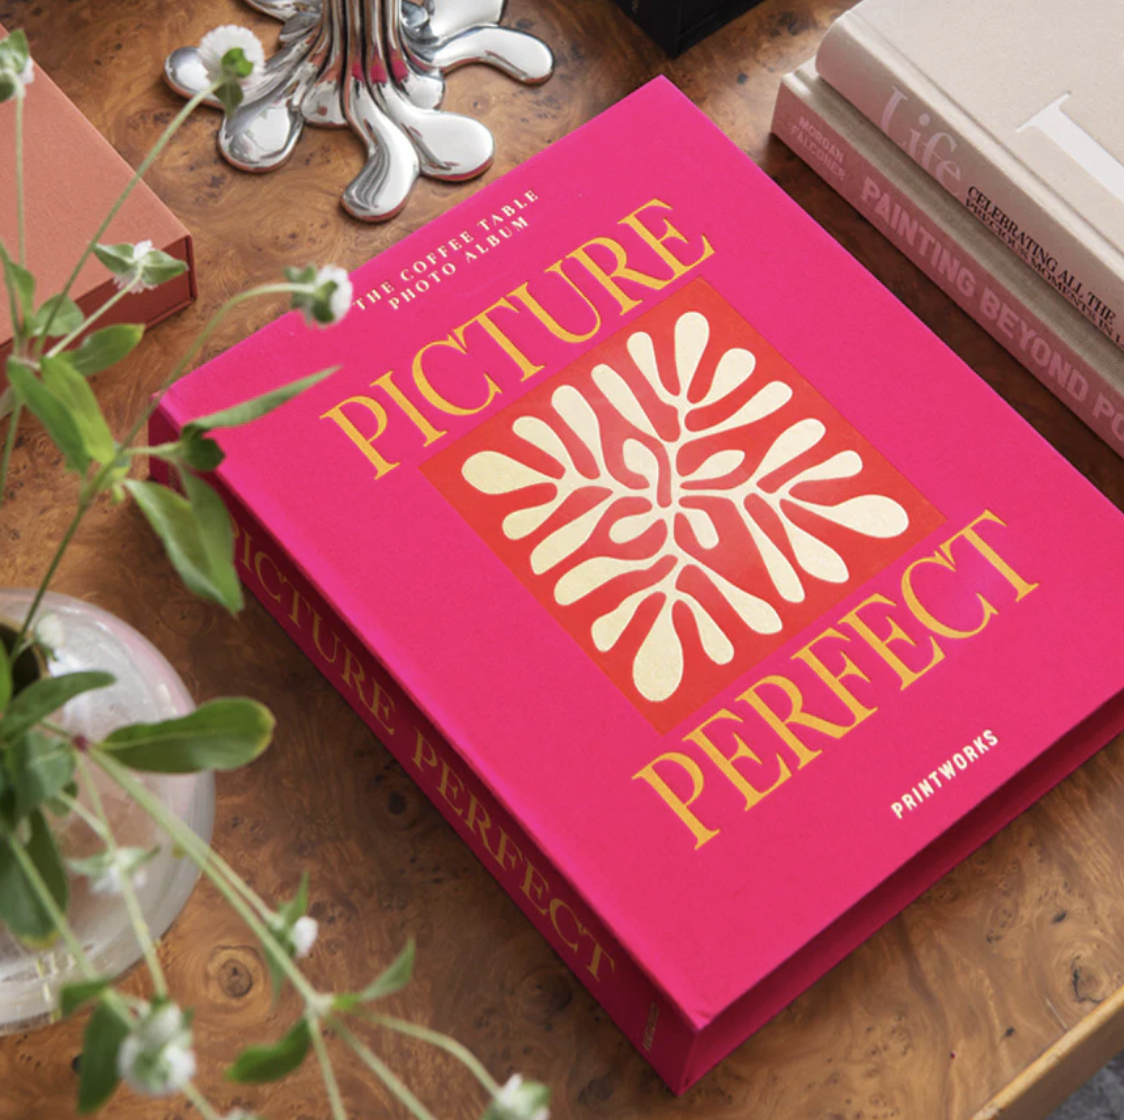 Picture Perfect - A Coffee Table Photo Album